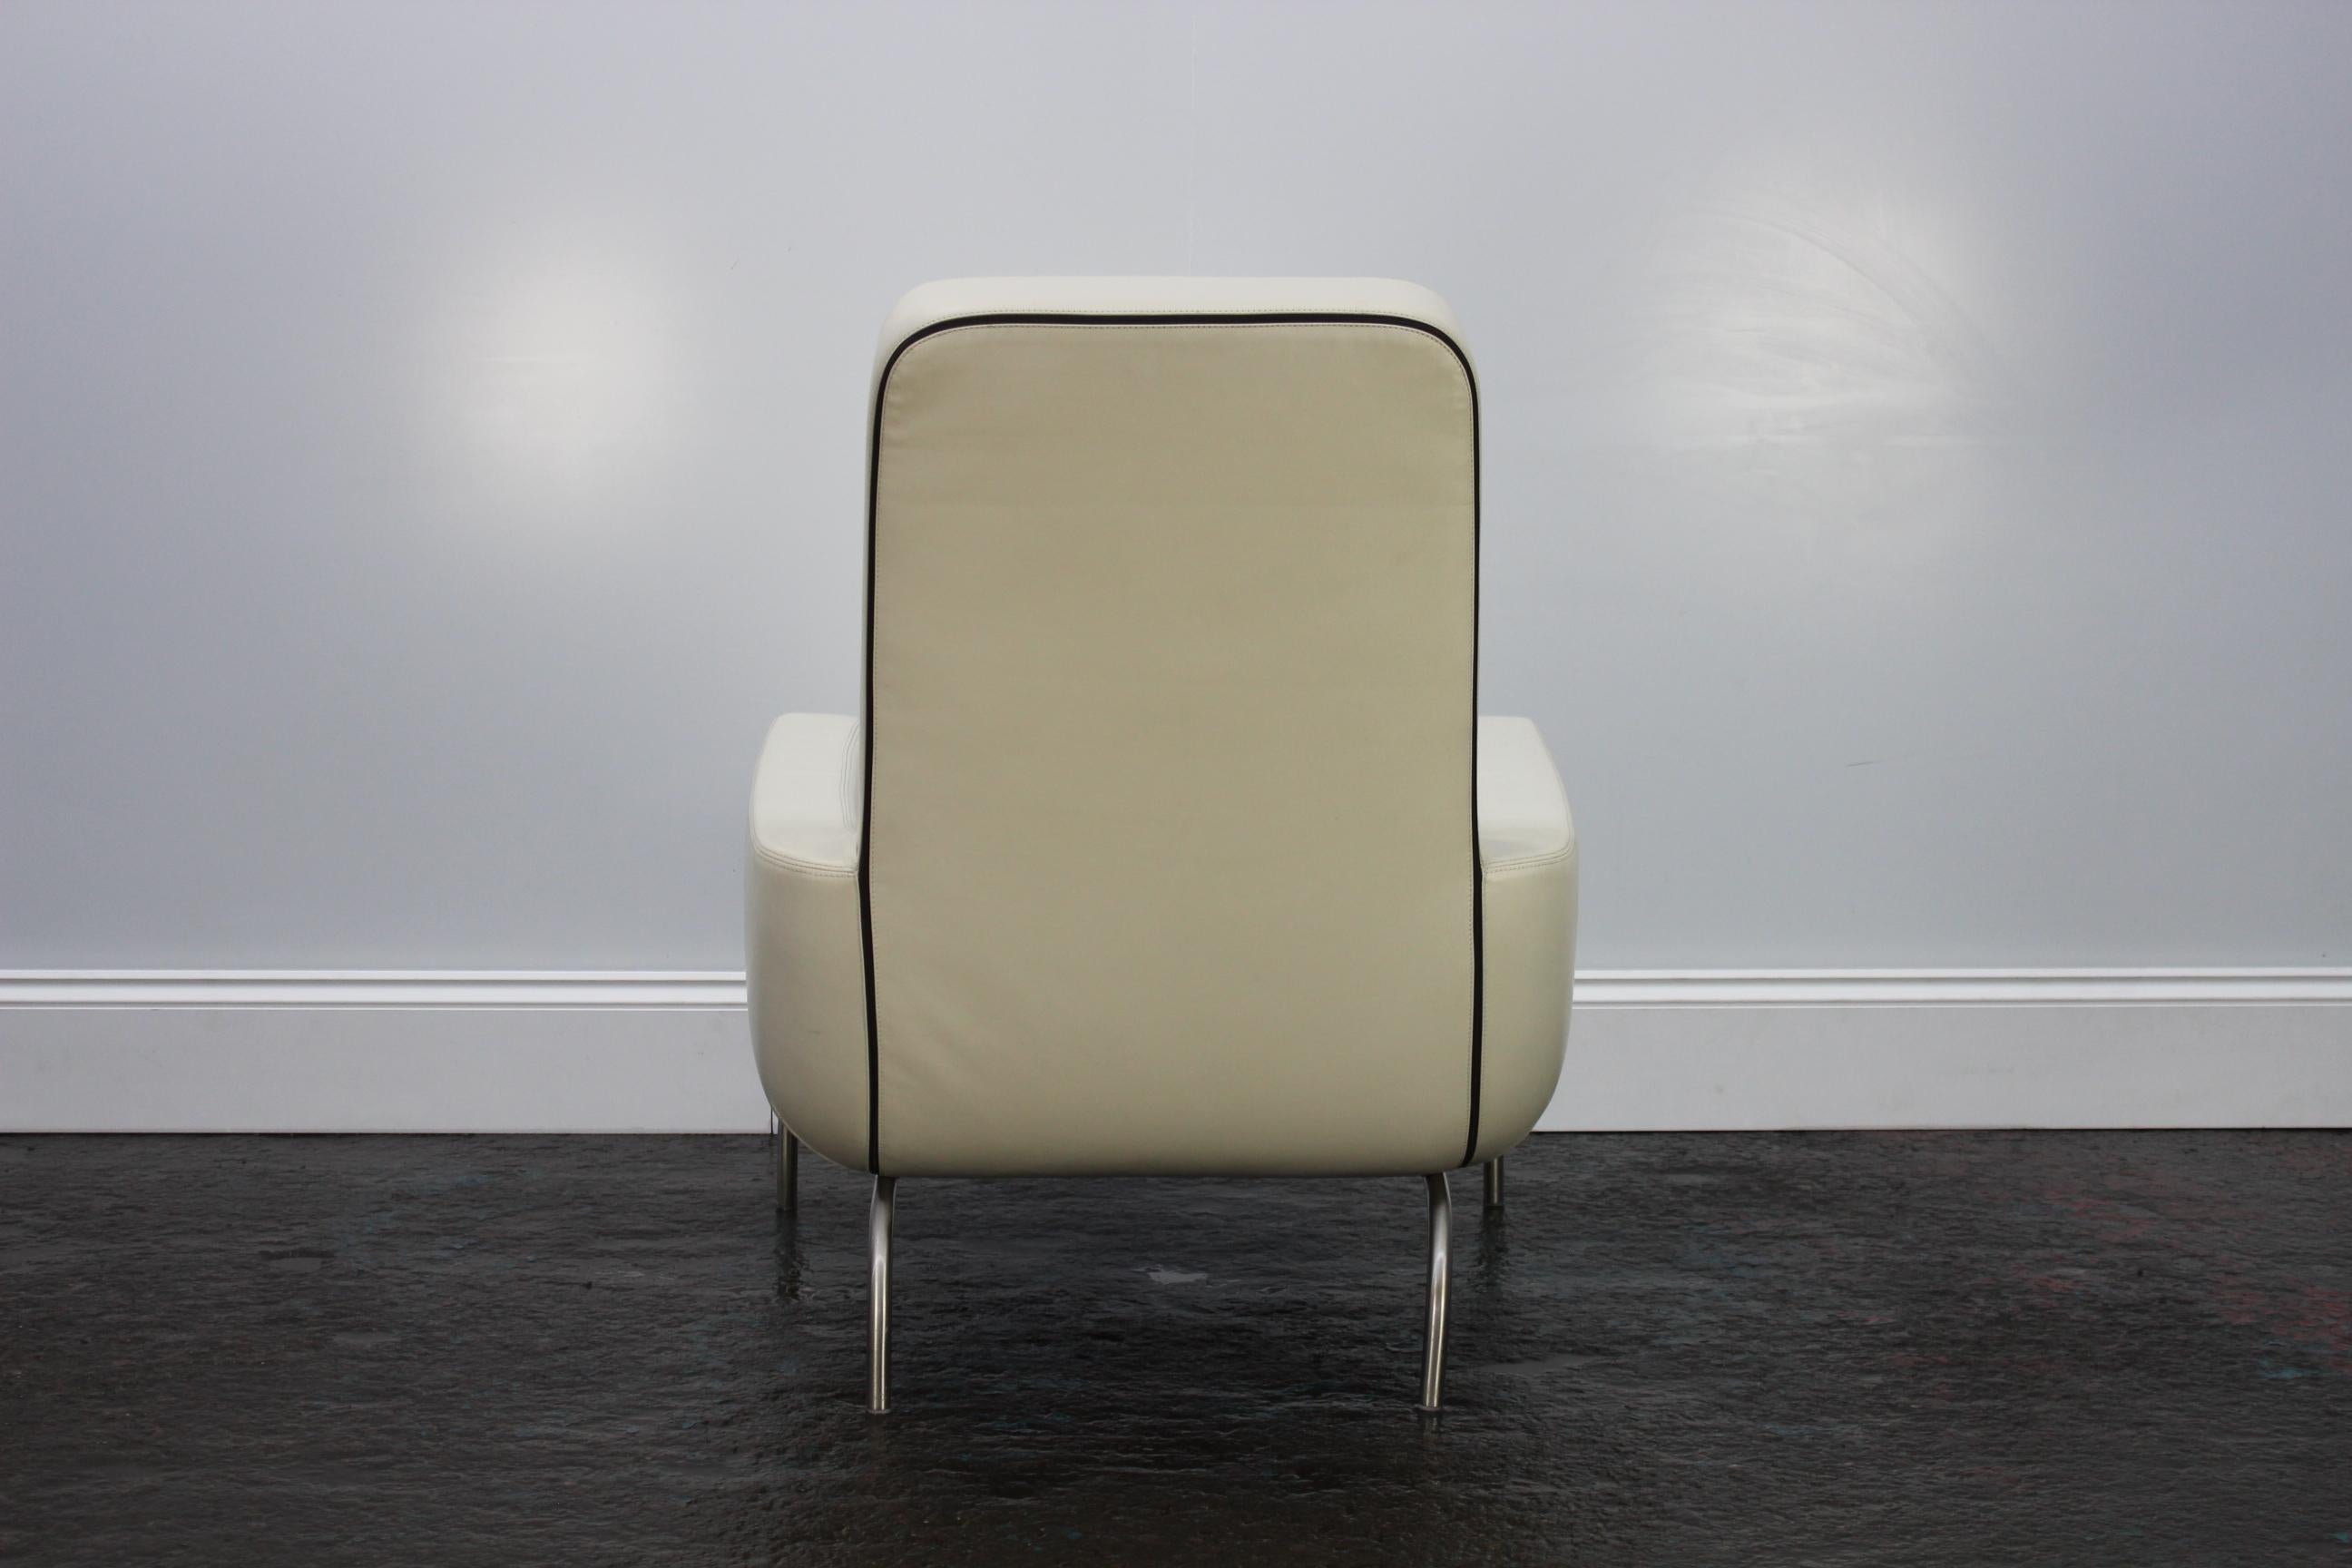 On offer on this occasion is a superb, Minotti “Dubuffet” armchair, dressed in a peerless, top-grade “Pelle” Leather in Ivory and with Satin-Metal base and legs.

As you will no doubt be aware by your interest in this Rodolfo Dordoni masterpiece,